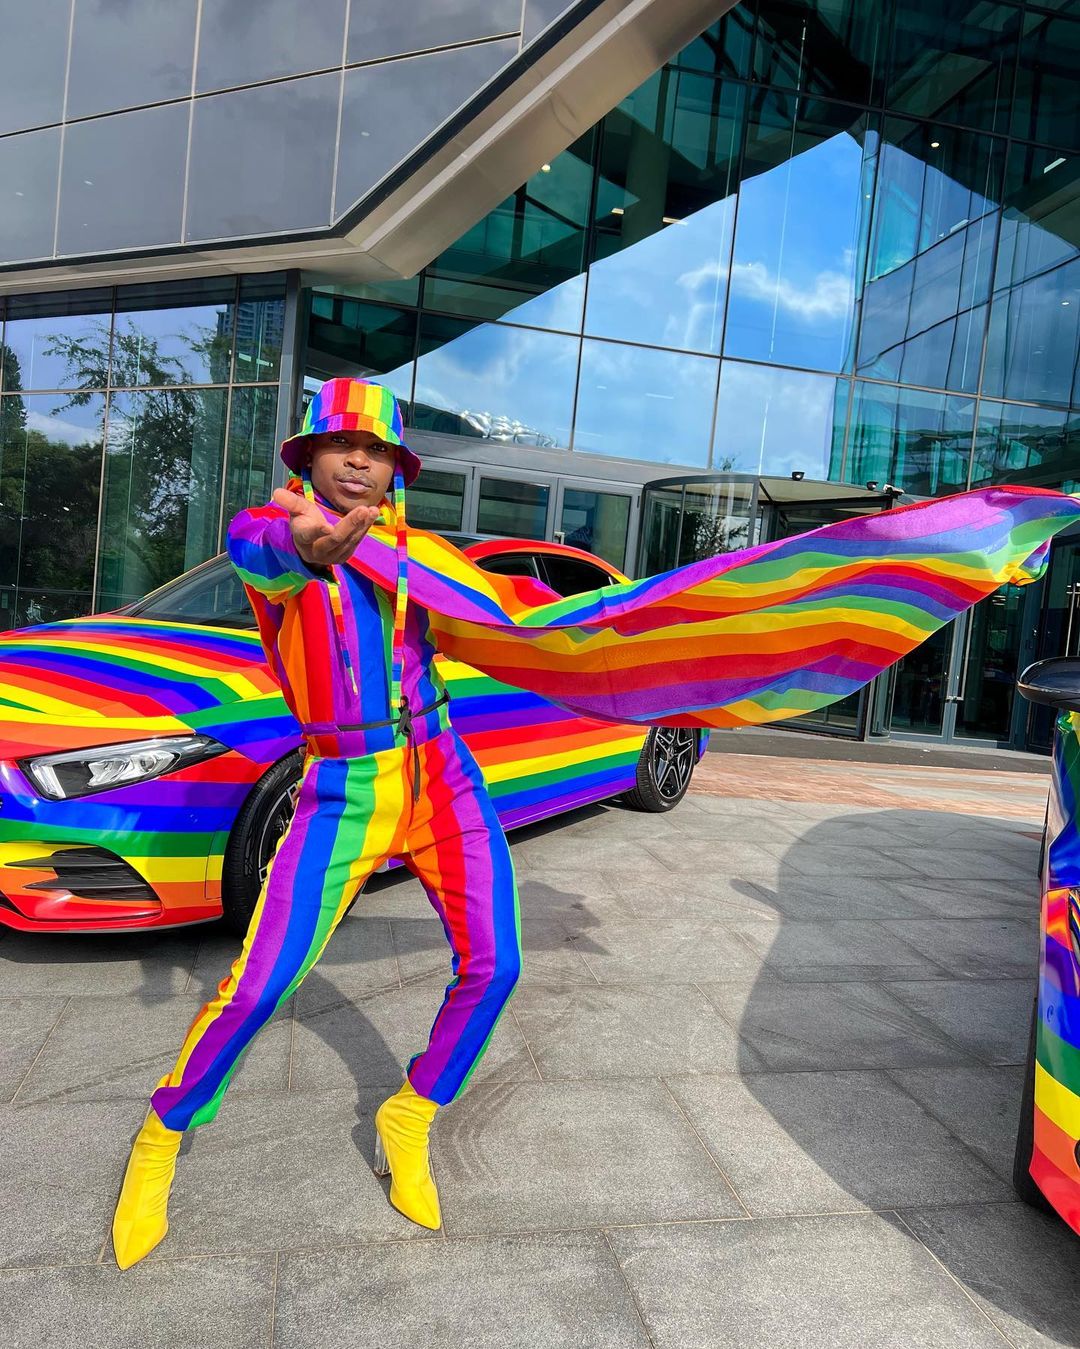 Lebo Max with his show stopping rainbow outfit